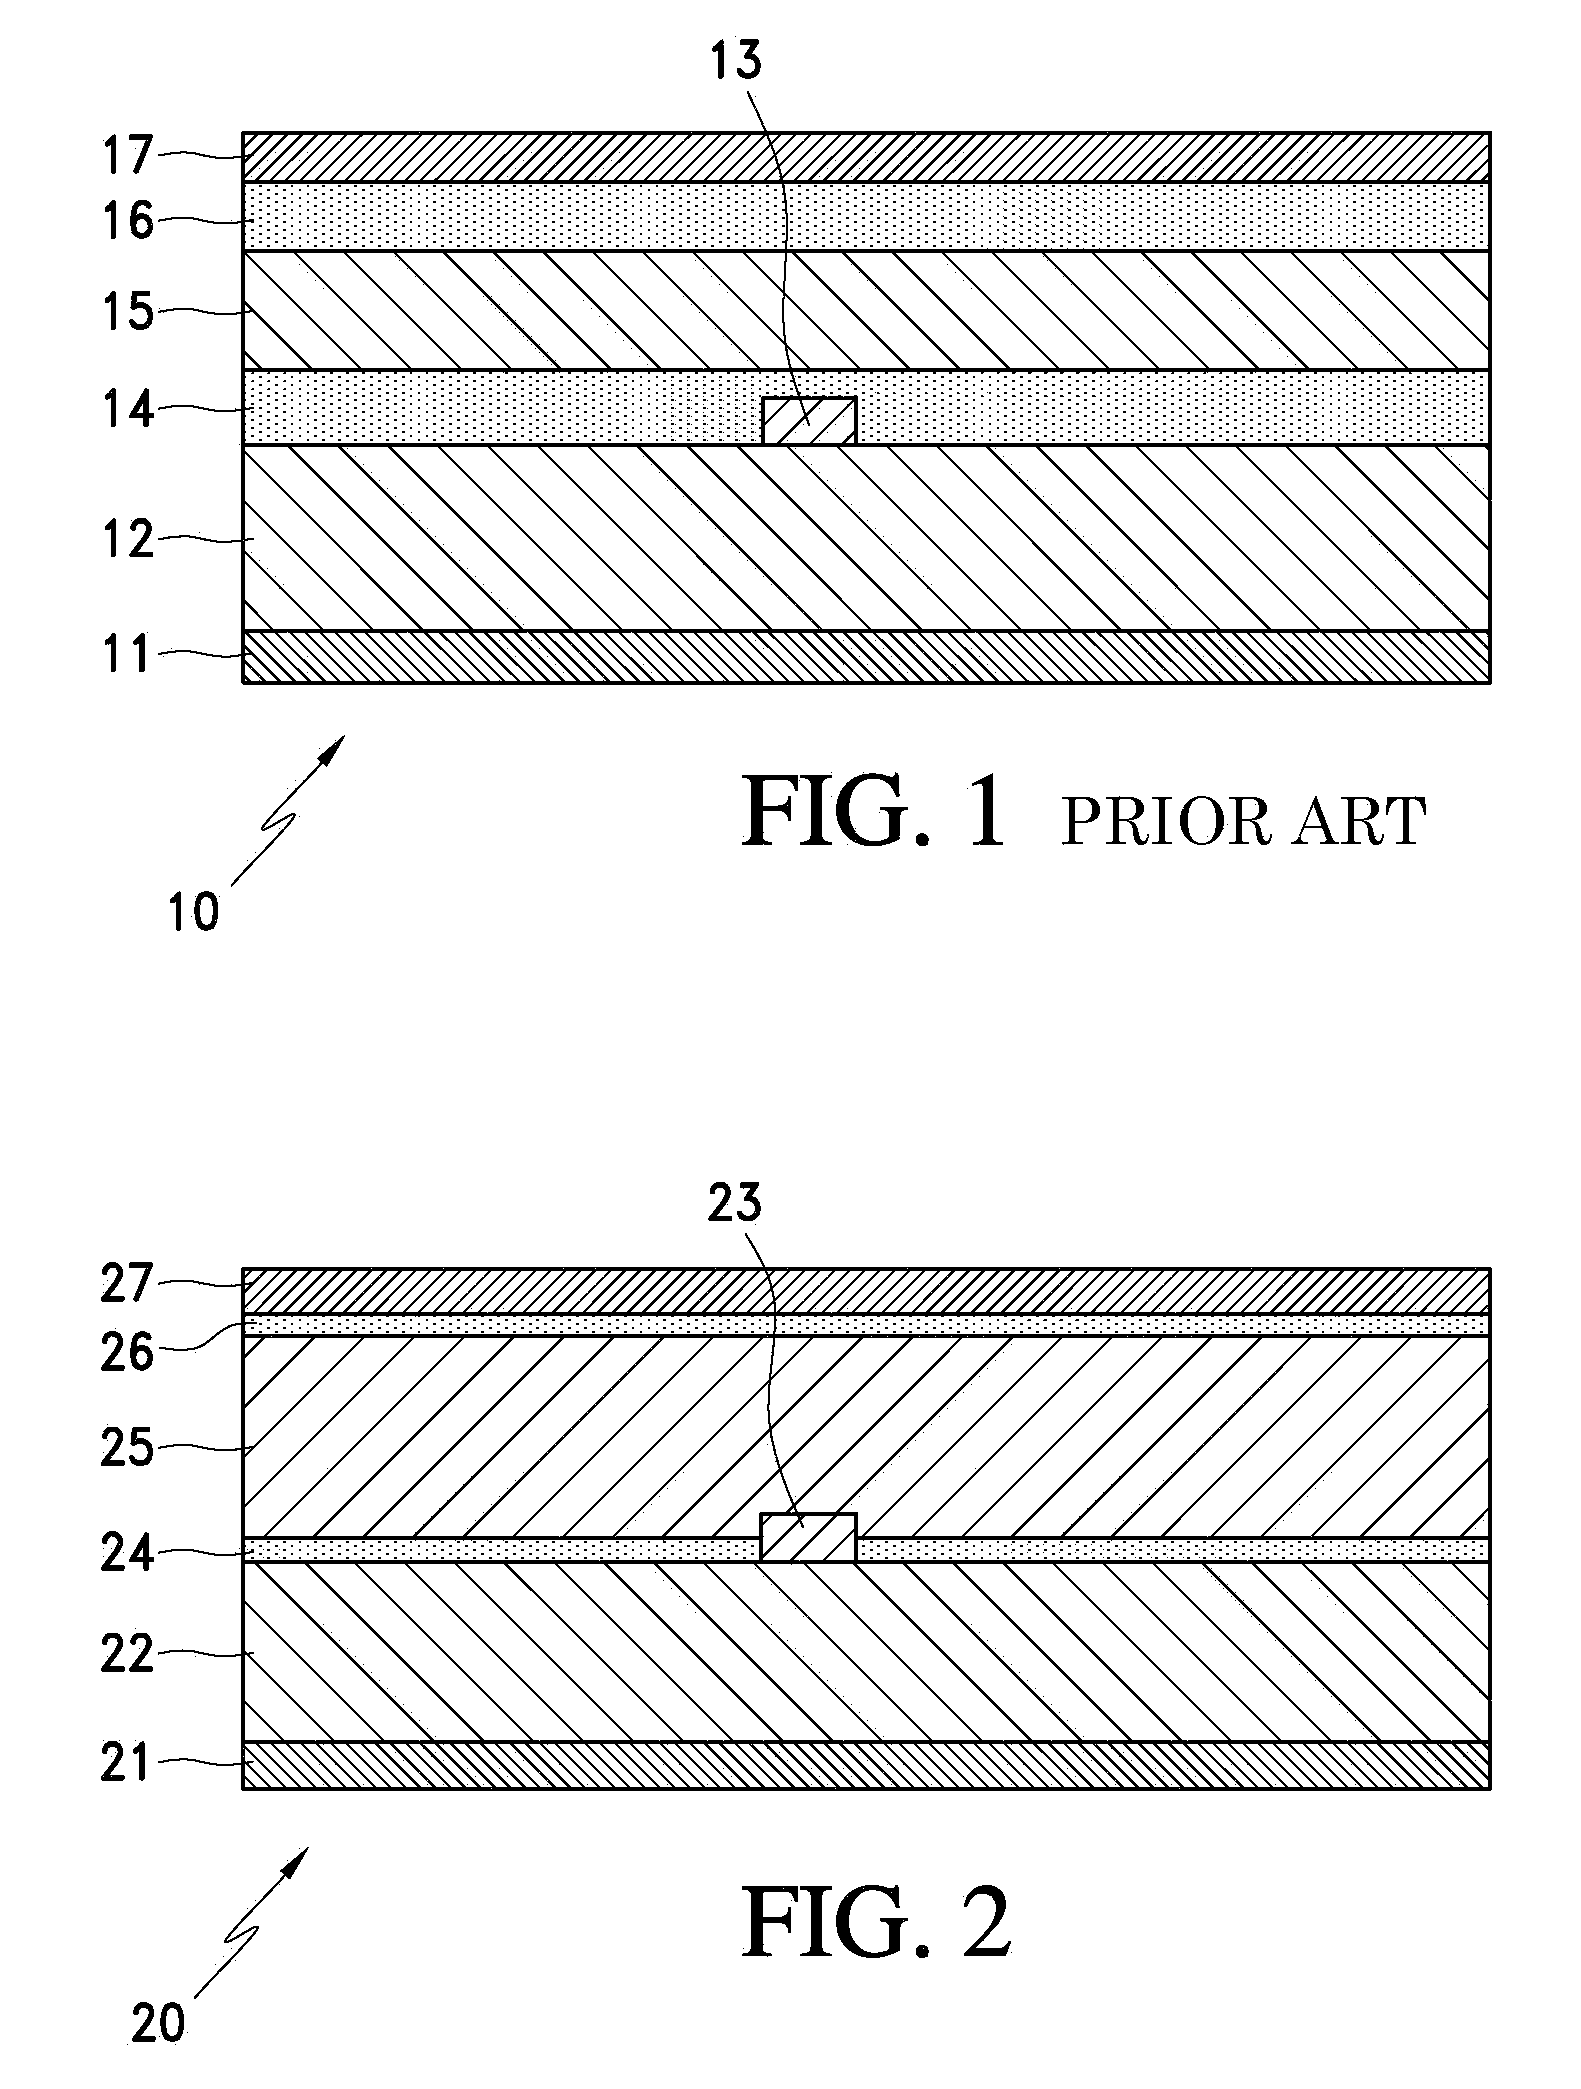 Method of manufacturing a flexible printed circuit assembly